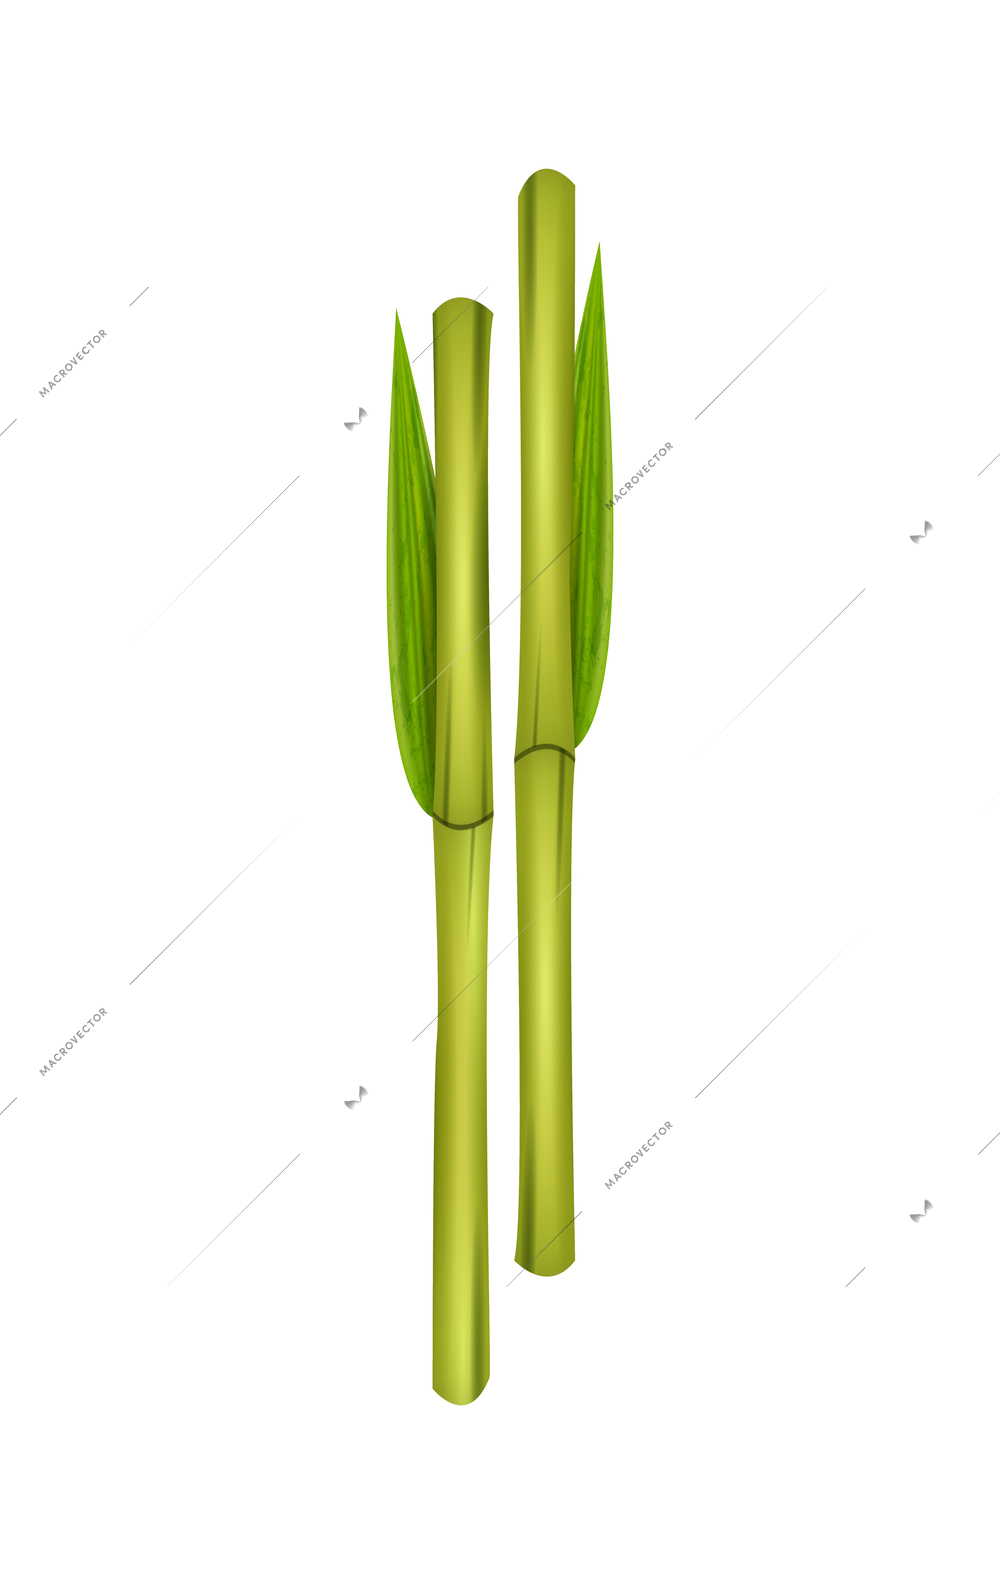 Green bamboo sticks with leaves realistic vector illustration